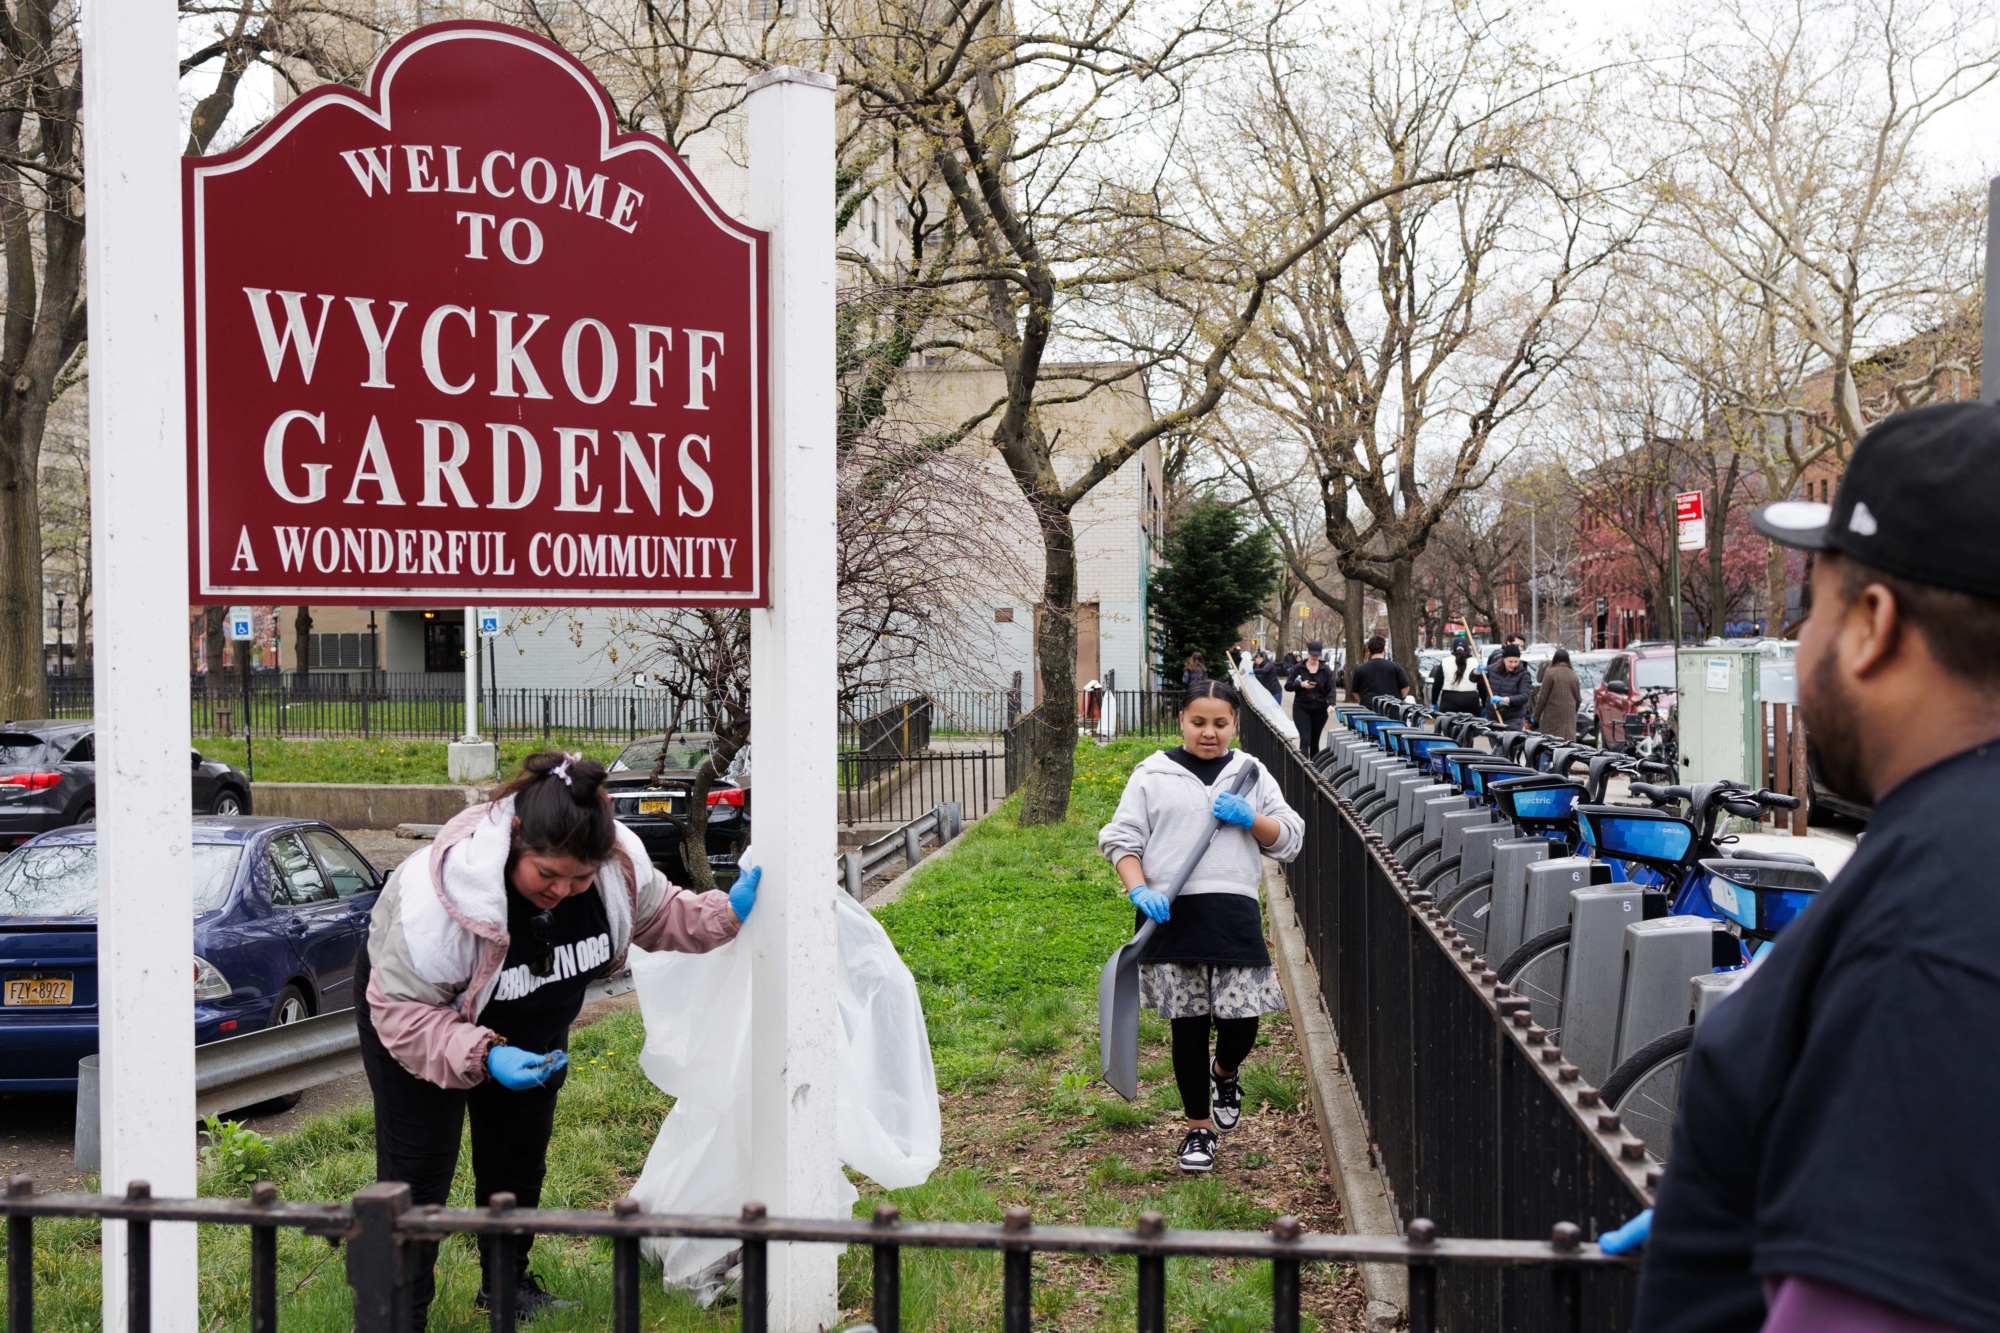 People participate in a community cleanup event at wyckoff gardens under a sign welcoming to "a wonderful community.